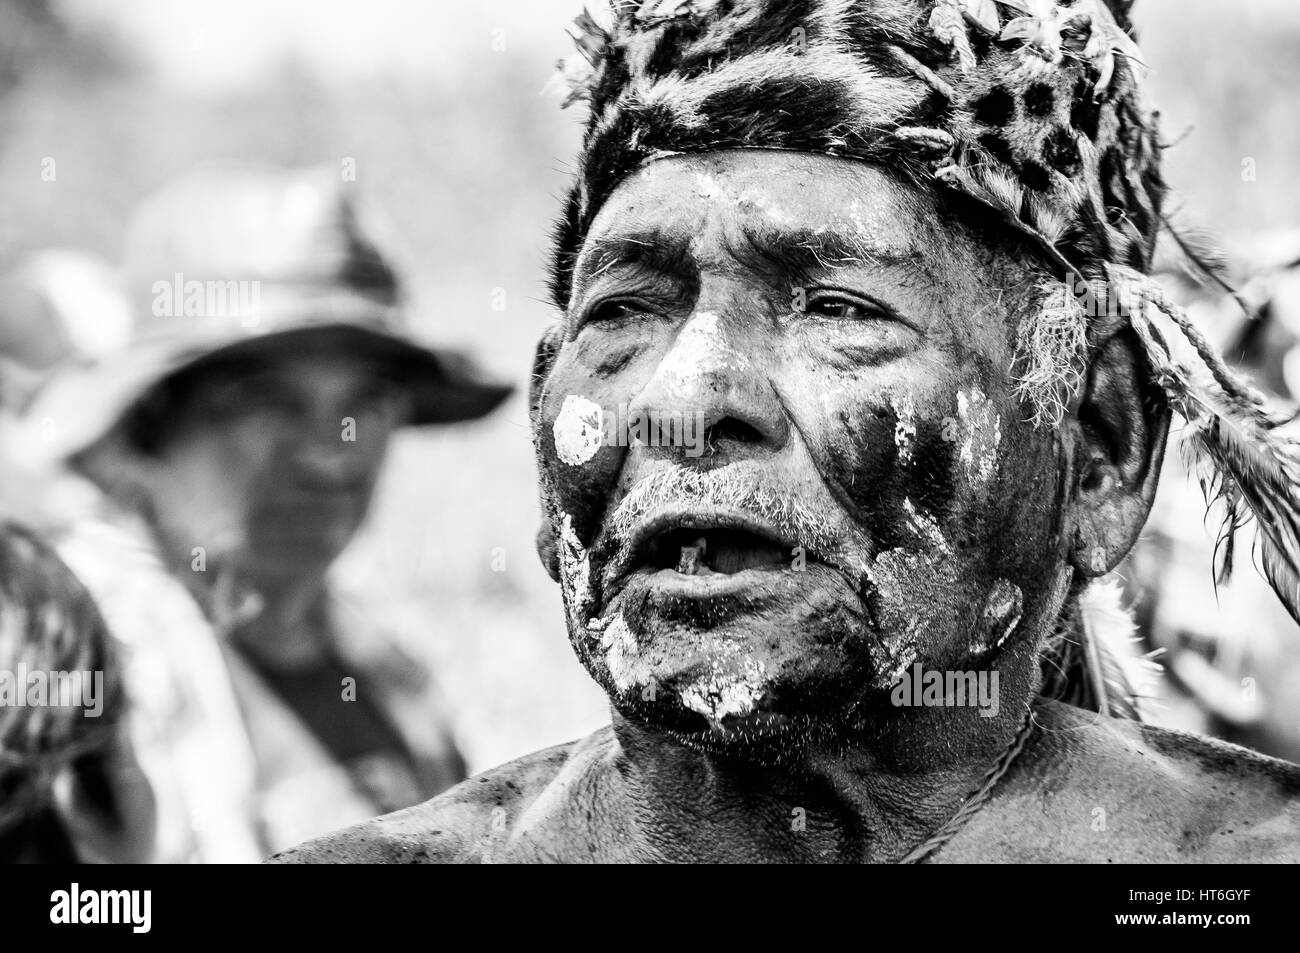 Puerto Pollo, Paraguay on August 8, 2015: Old Paraguayan indigenous man with face paintings from the Yshir tribe at a traditional ceremony Stock Photo